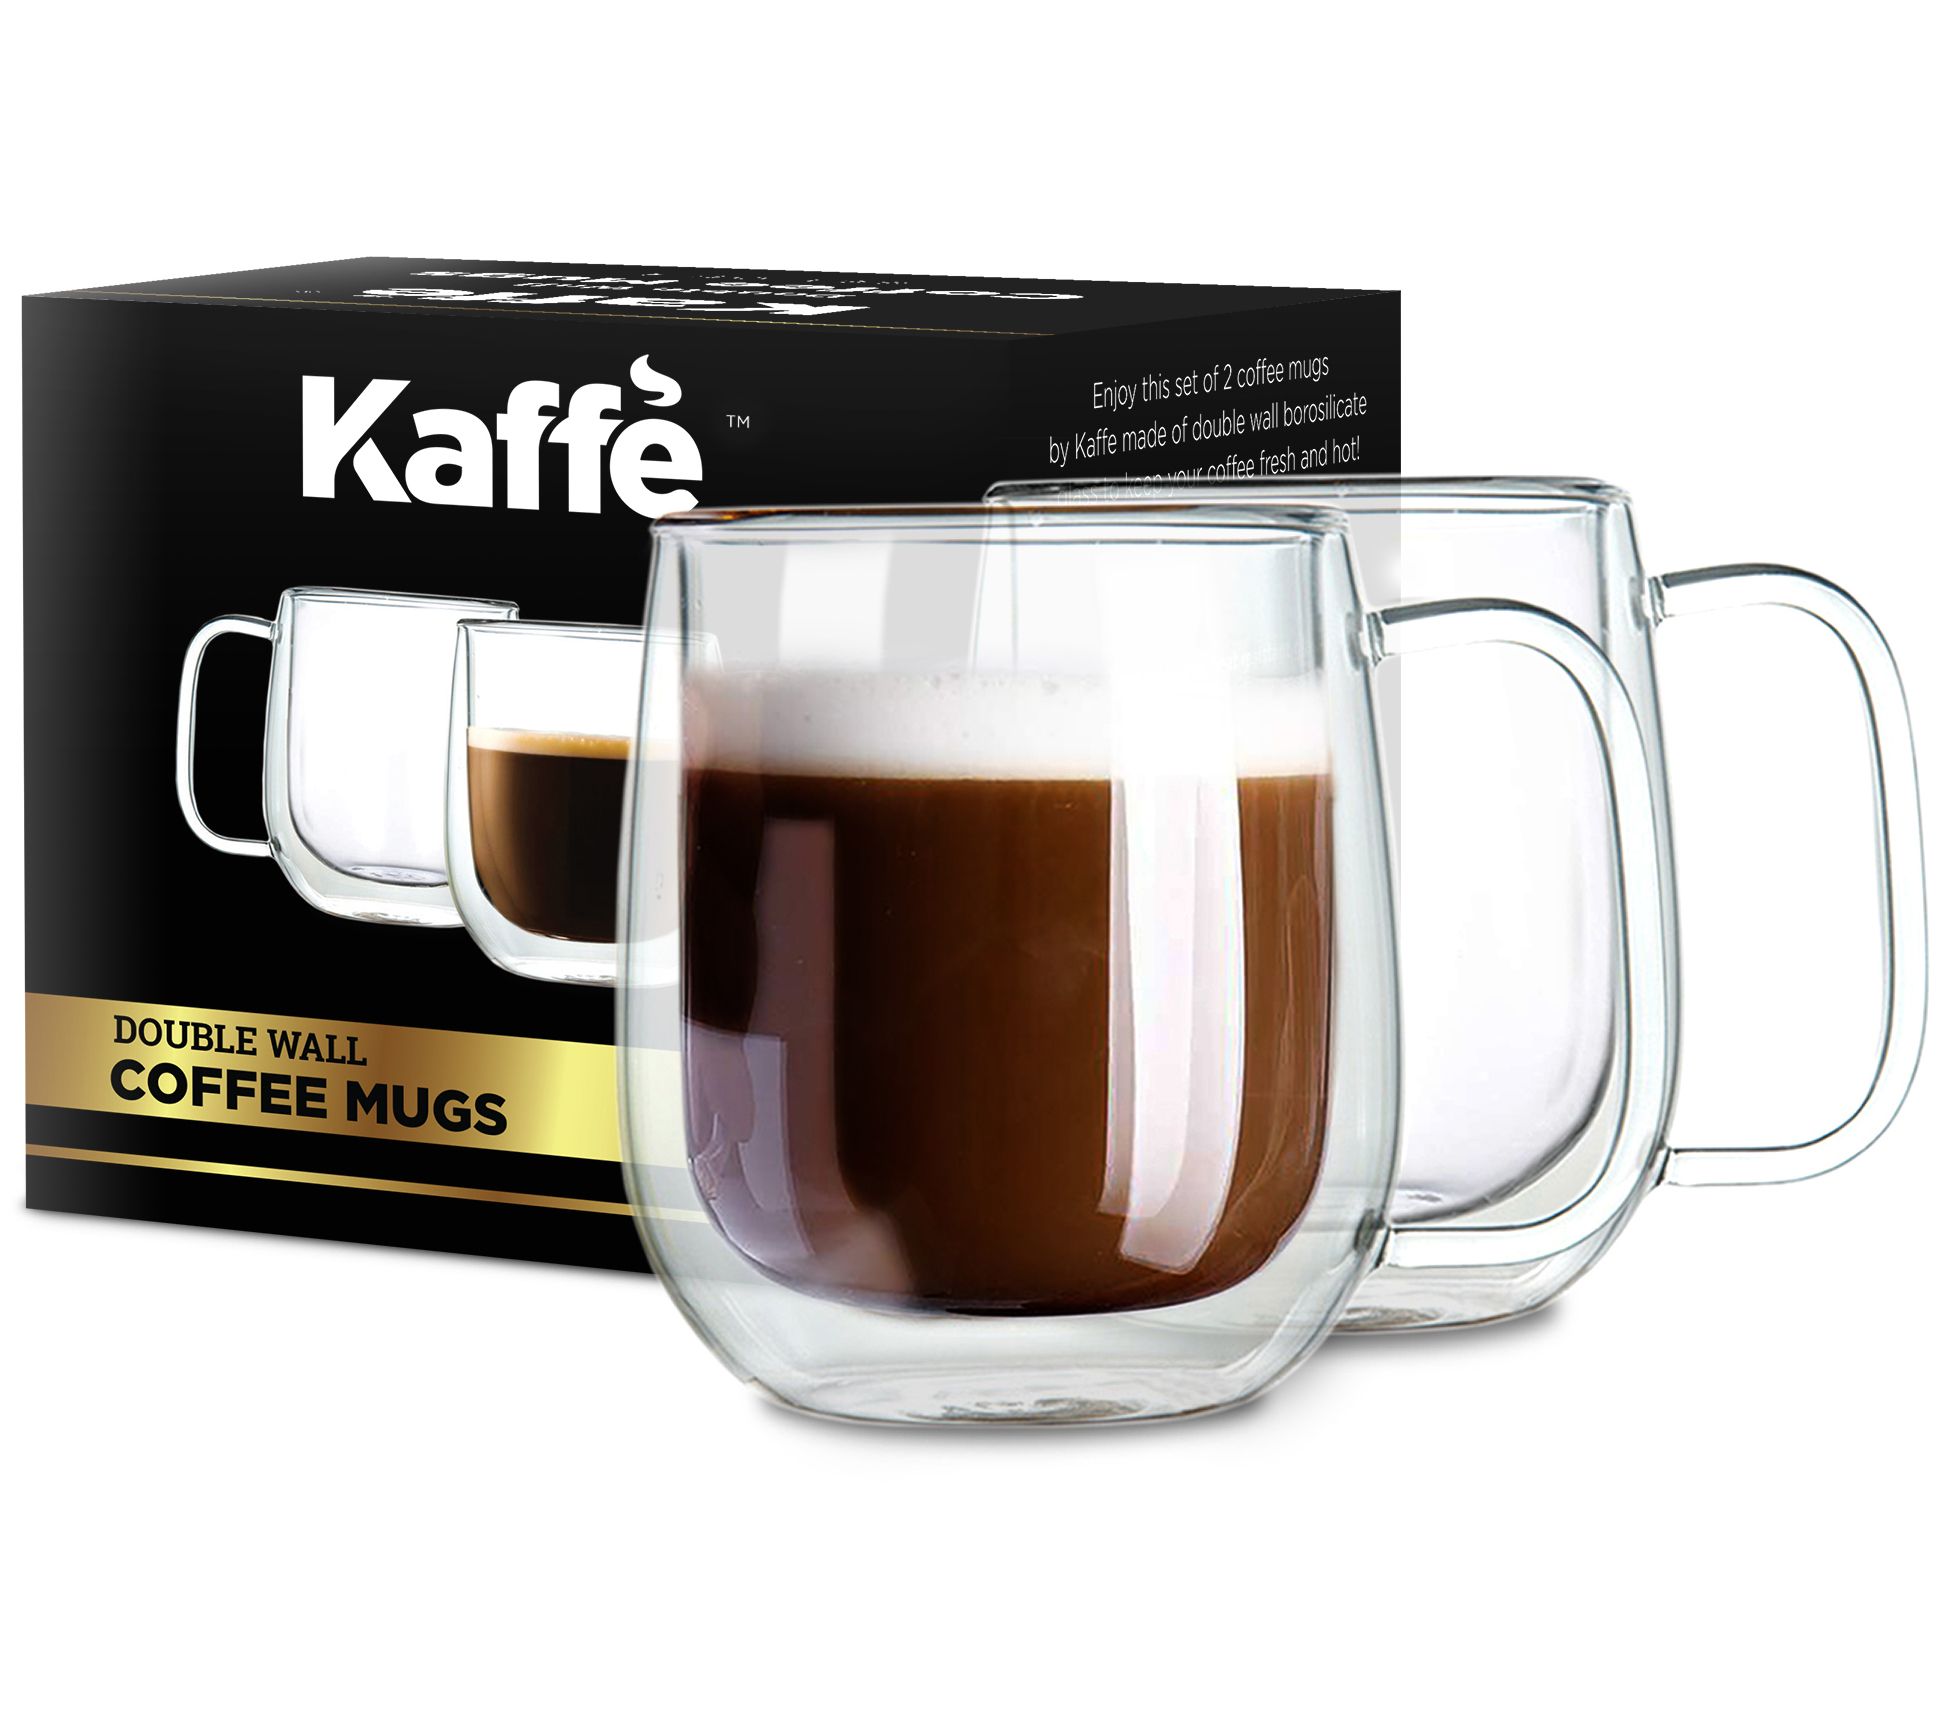 Insulated Heart Coffee Mugs 2.7 OZ Set of 2 Double Wall Glass Coffee Cups With Handle Espresso Latte Cappuccino or Tea Cup 2.7OZ